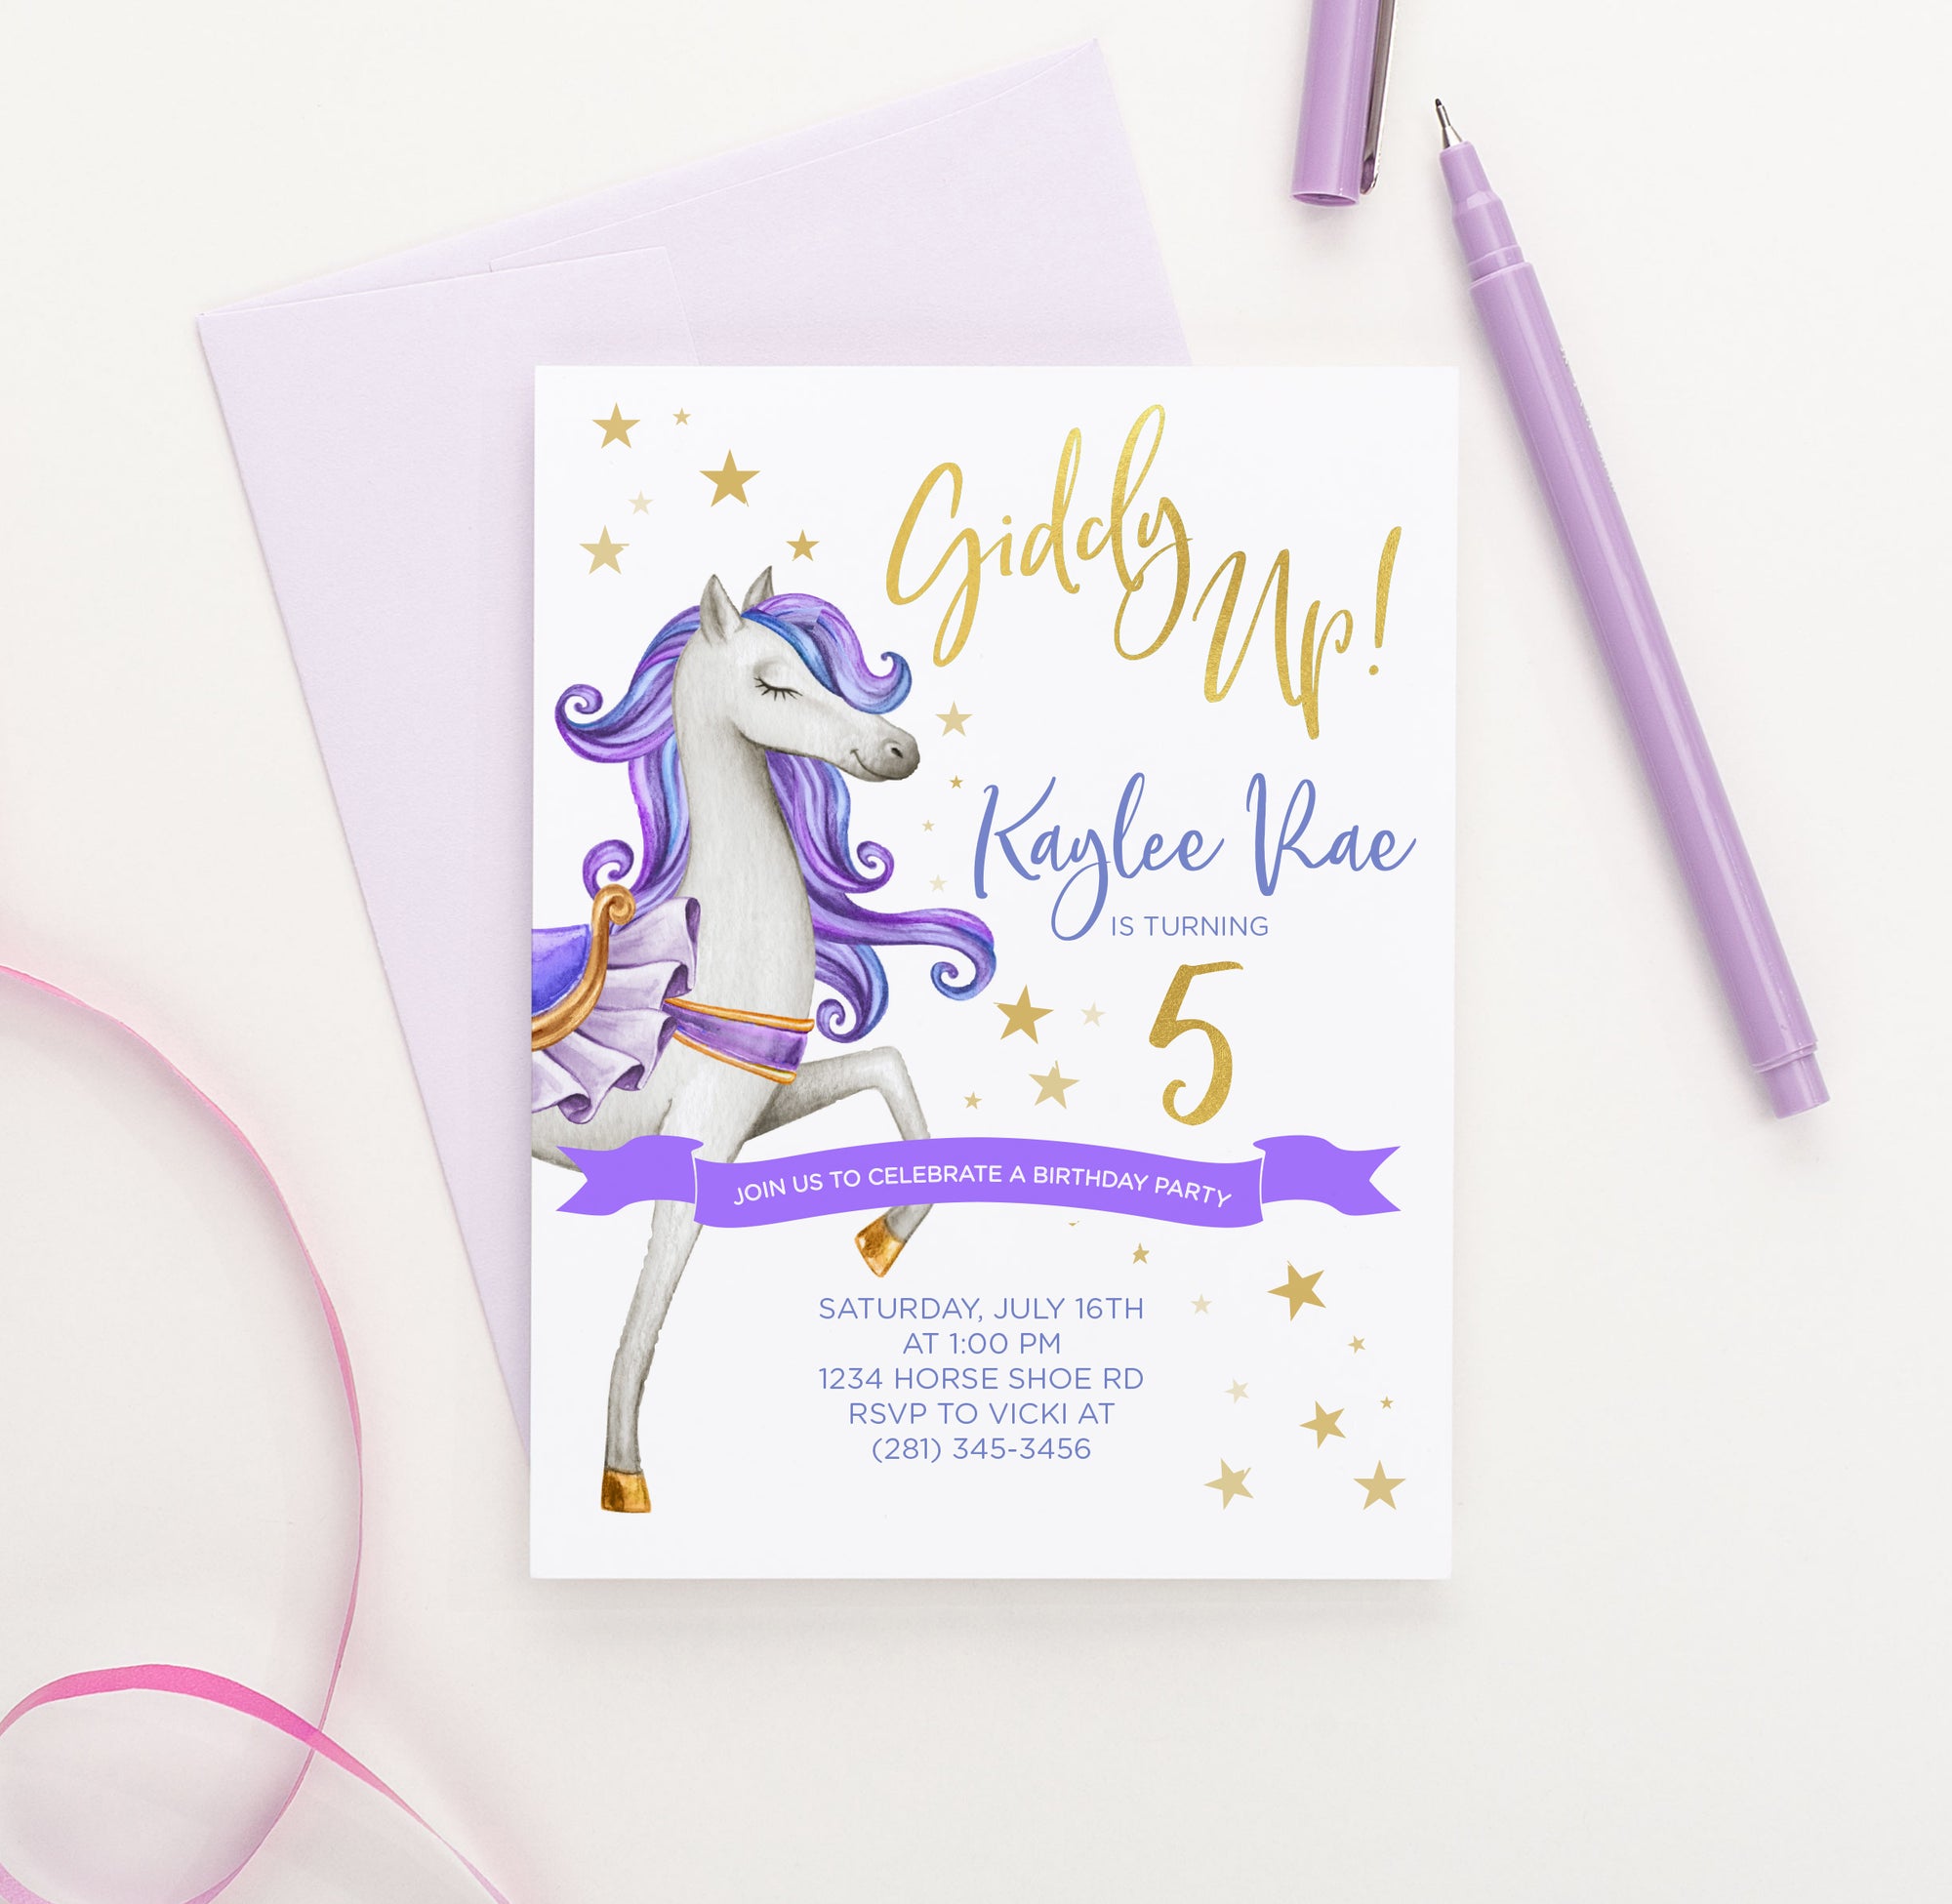 Giddy Up Purple Horse Birthday Invitations With Gold Stars